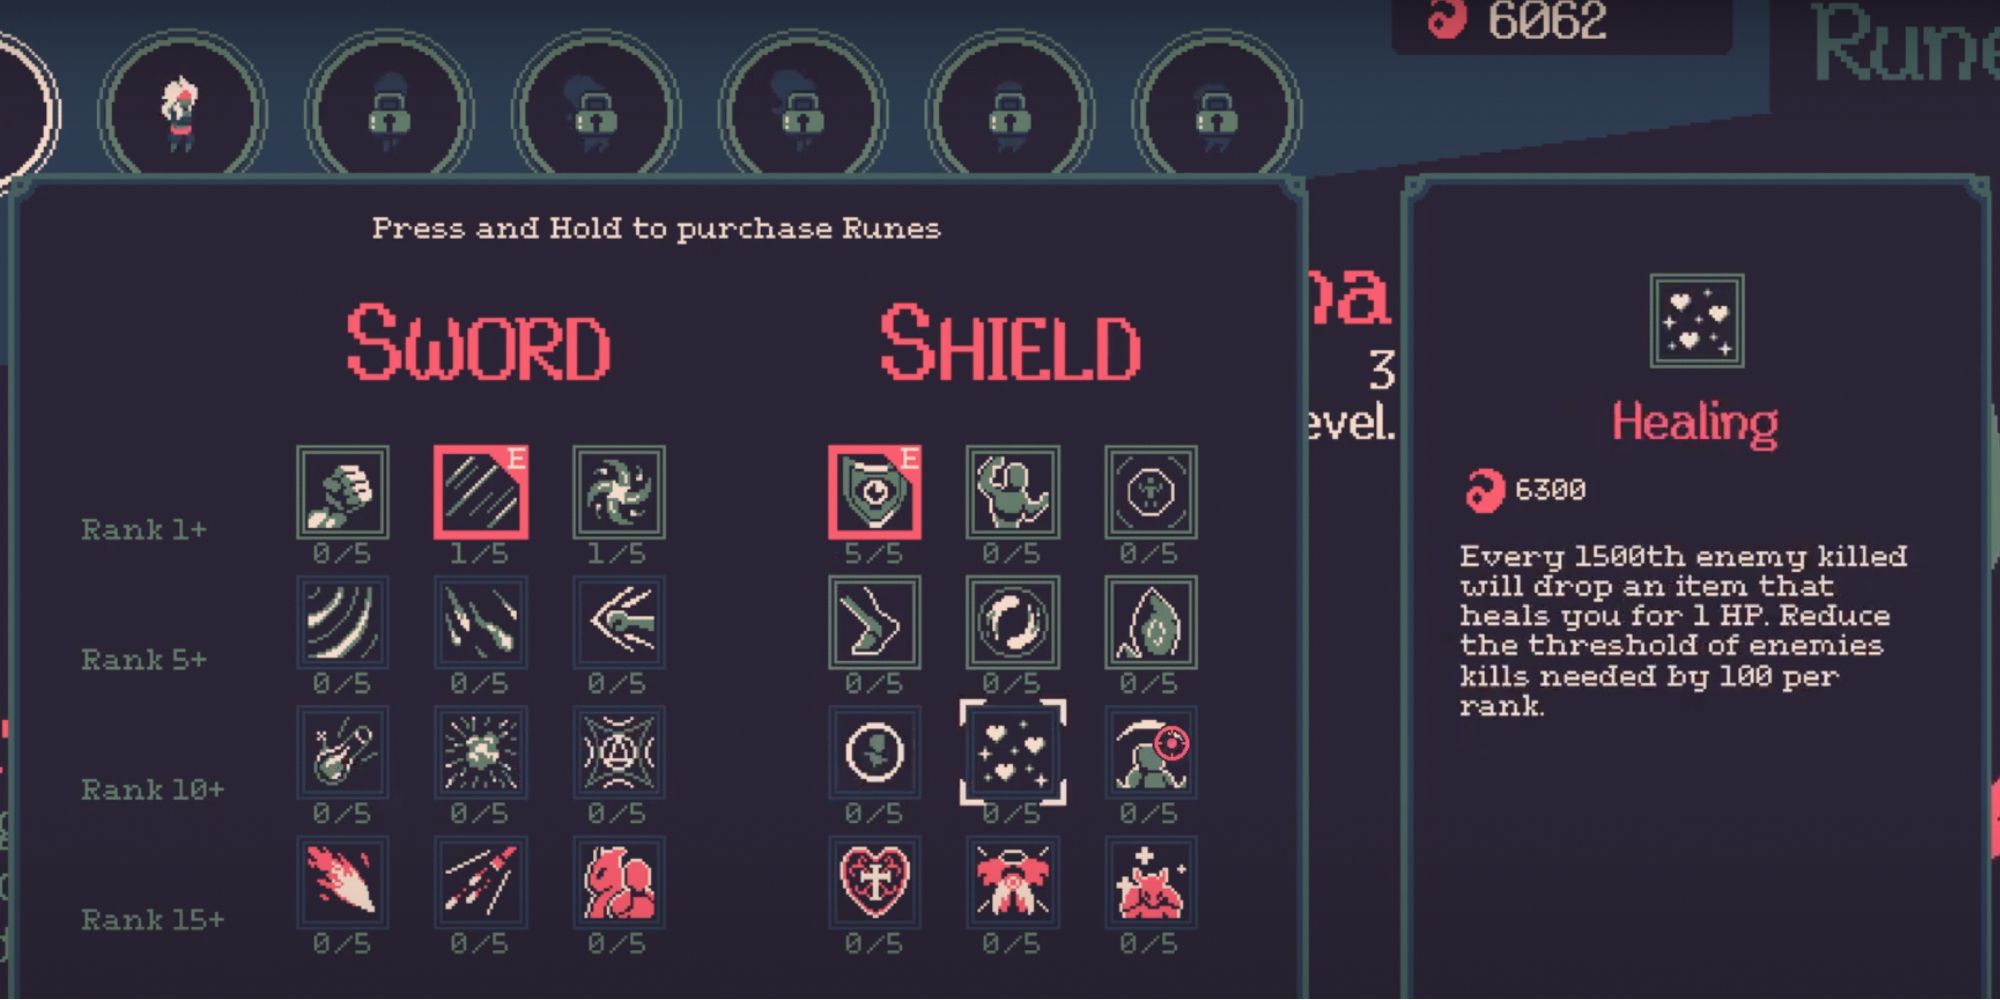 20 Minutes Till Dawn - Shield runes can disable enemies - Player chooses Healing for additional HP